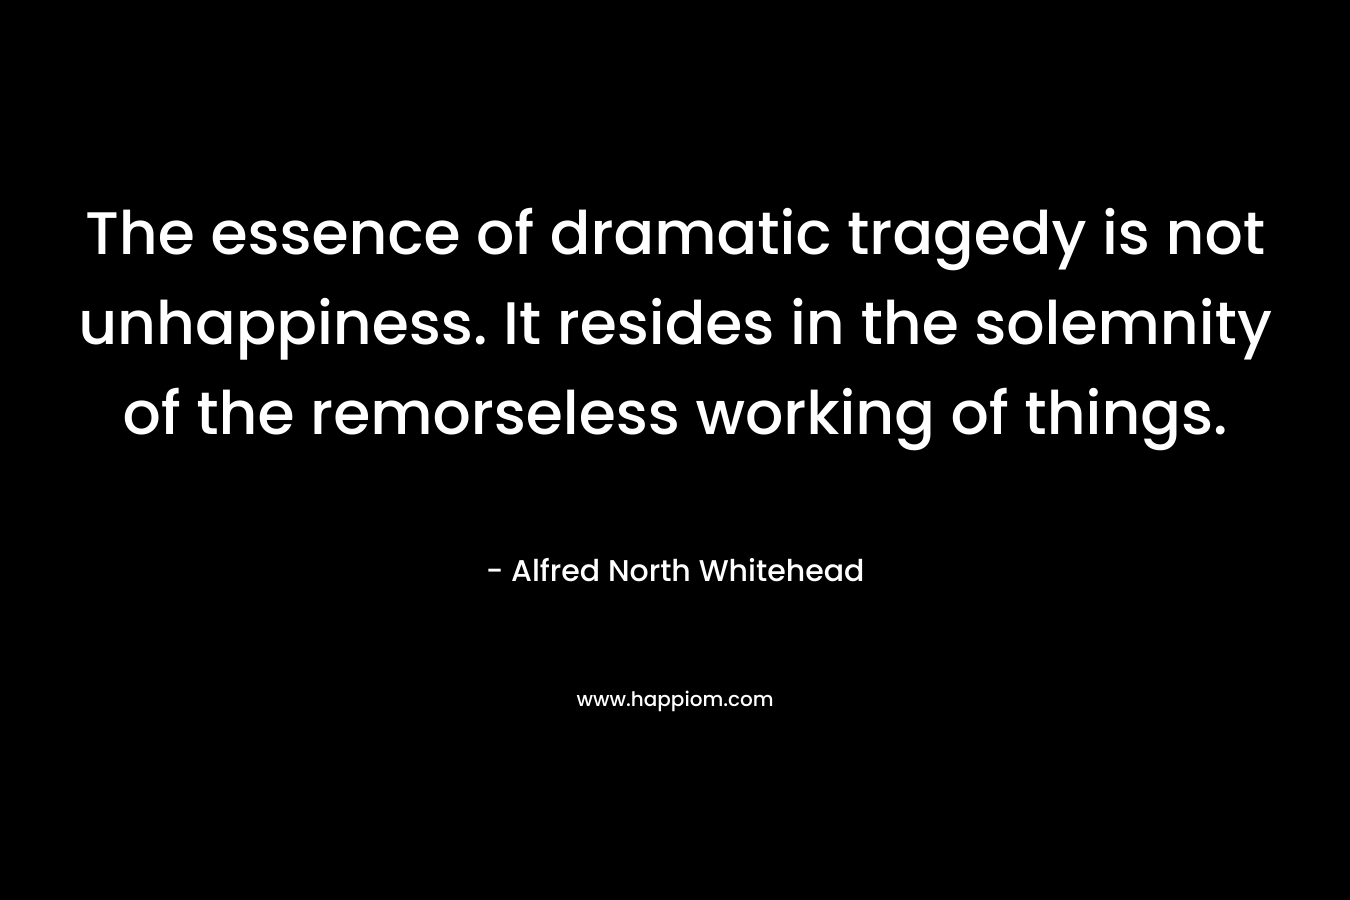 The essence of dramatic tragedy is not unhappiness. It resides in the solemnity of the remorseless working of things. – Alfred North Whitehead